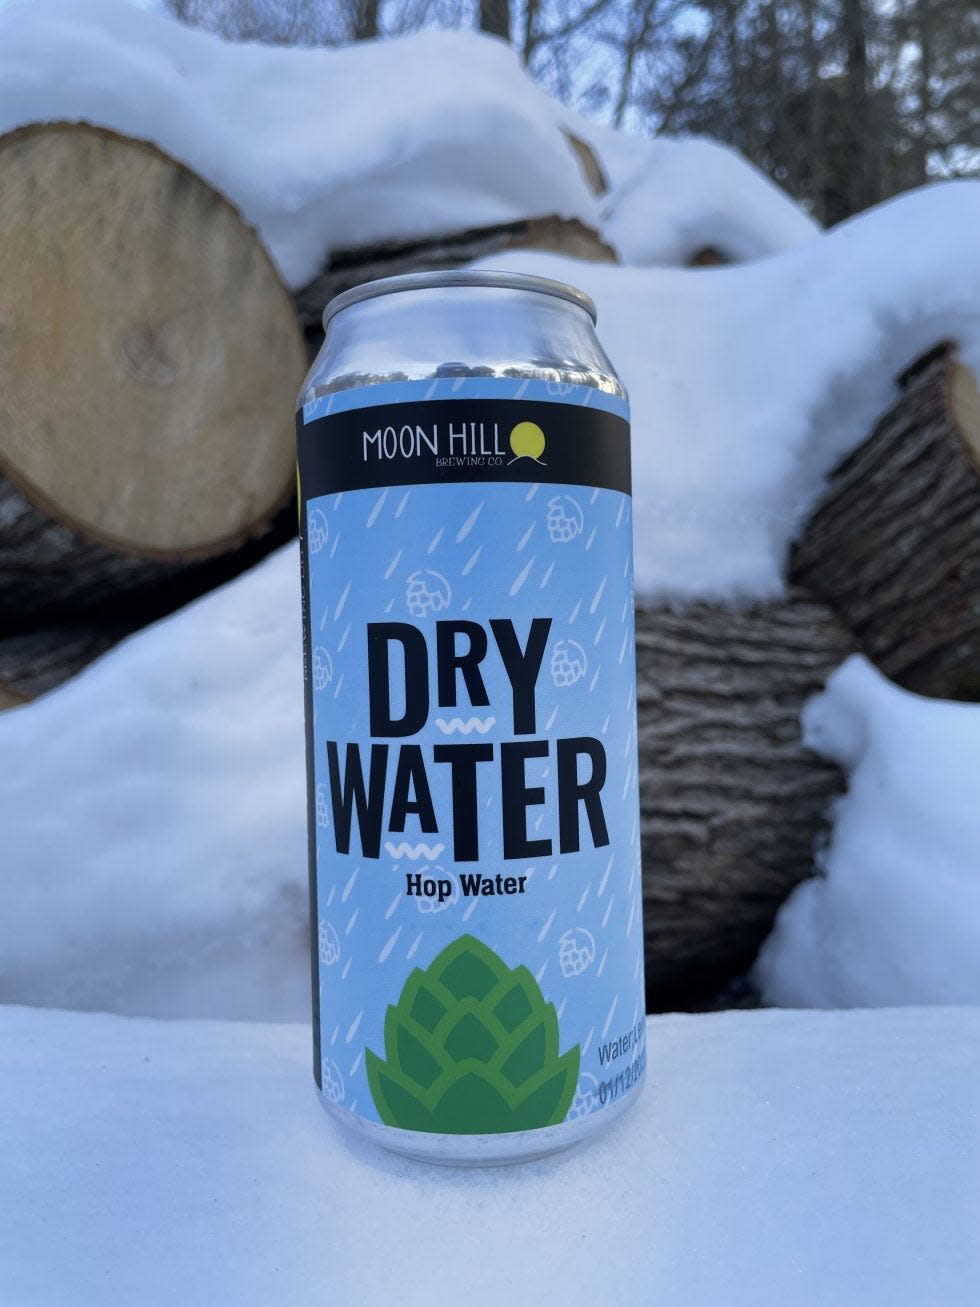 Moon Hill Brewery's new serious seltzer, Dry Water, costs $8 for a four-pack of 16-ounce cans.